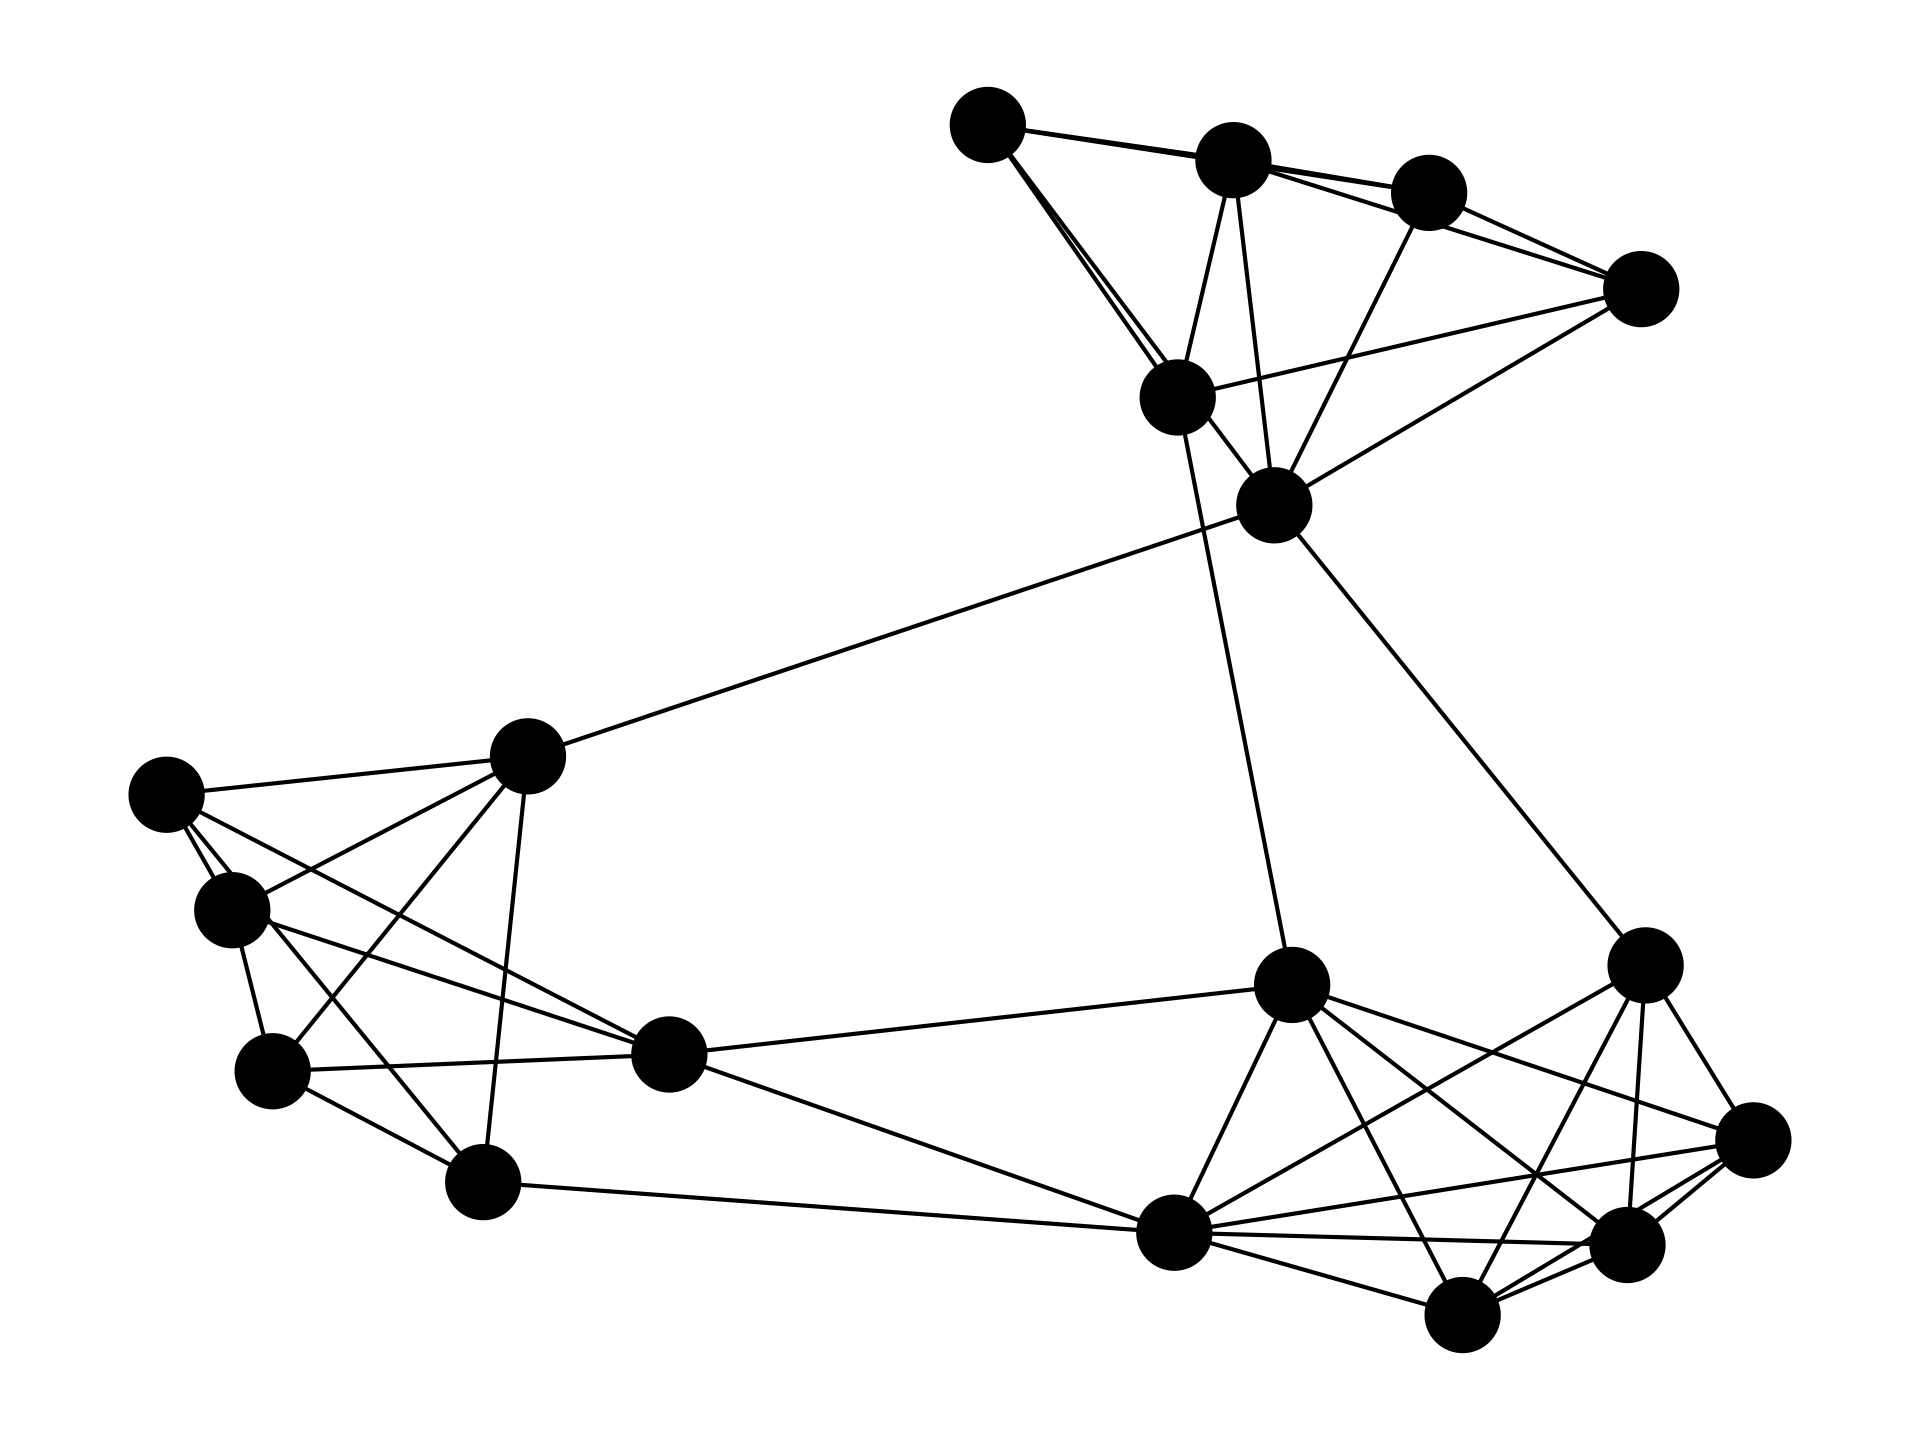 An example network with three communities